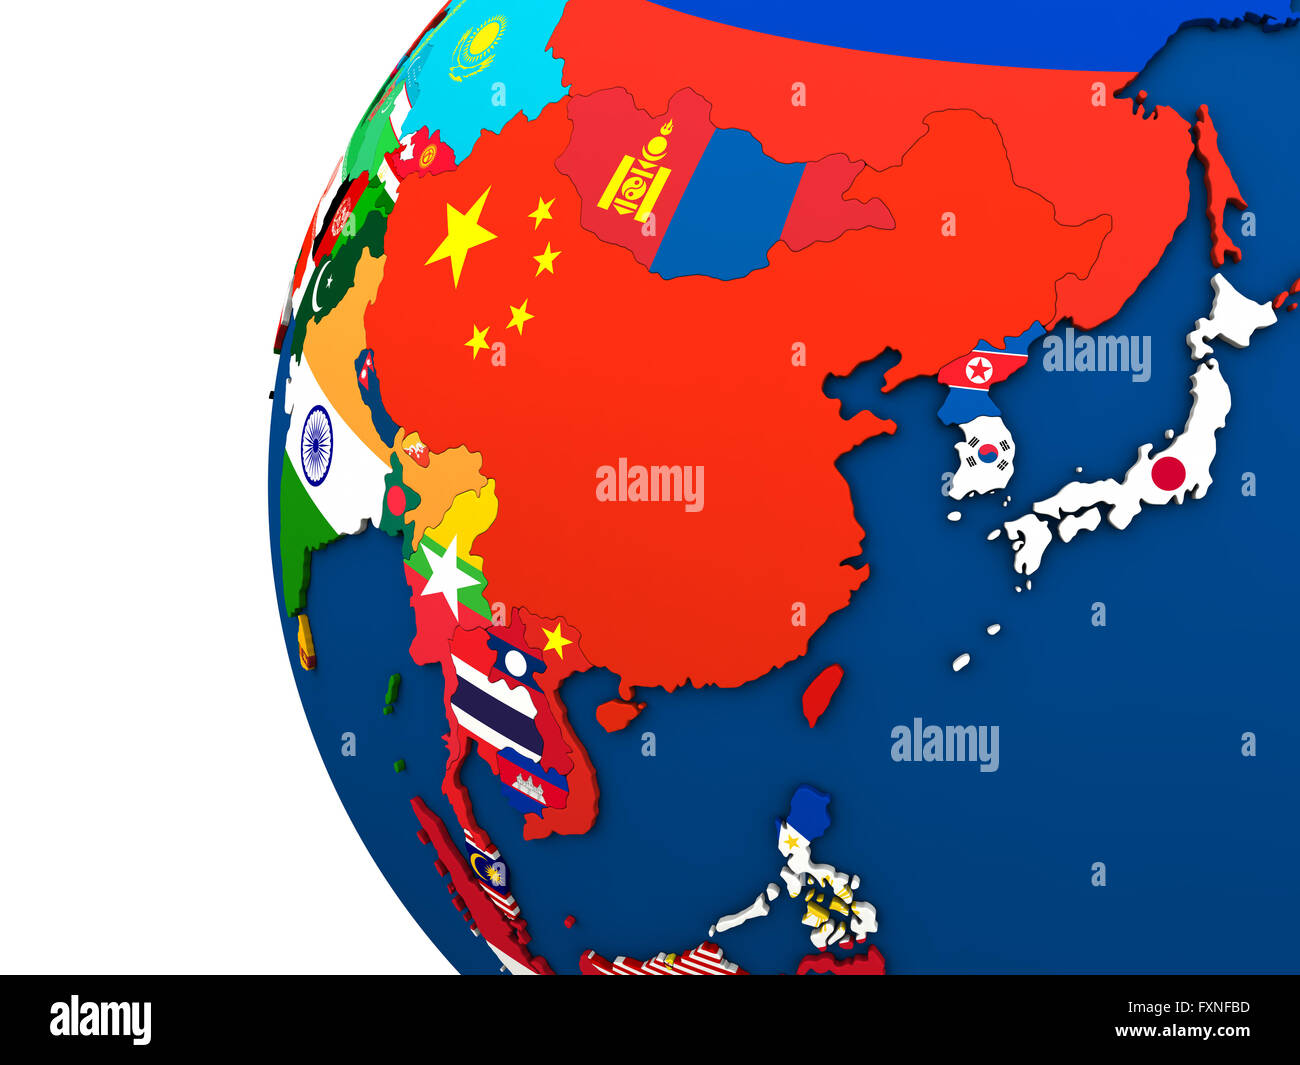 Political Map Of East Asia With Each Country Represented By Its National Flag. 3D Illustration Stock Photo - Alamy